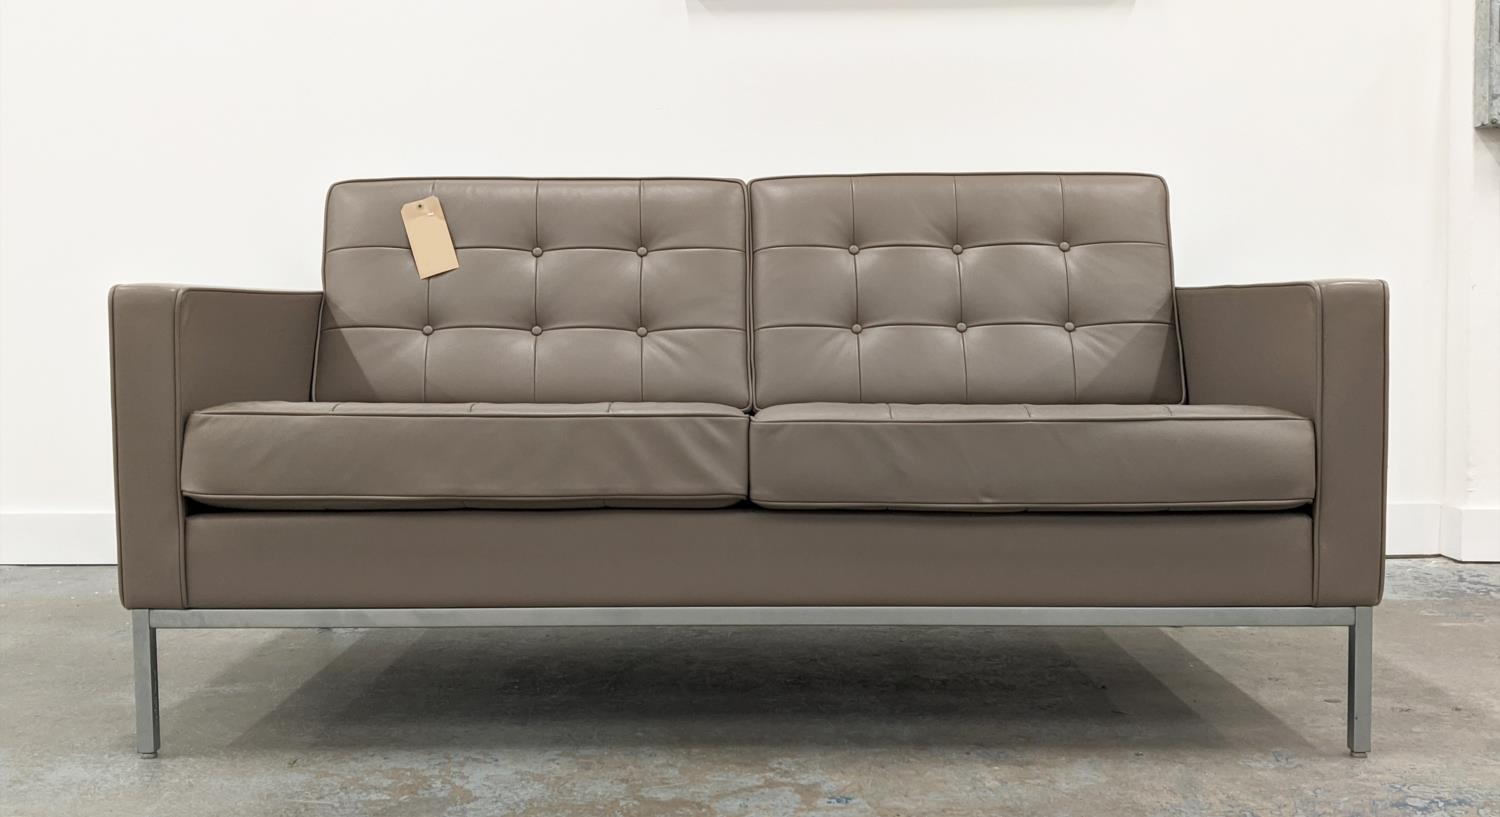 KNOLL FLORENCE KNOLL SOFA, by Florence Knoll, 159.5cm W. - Image 3 of 8